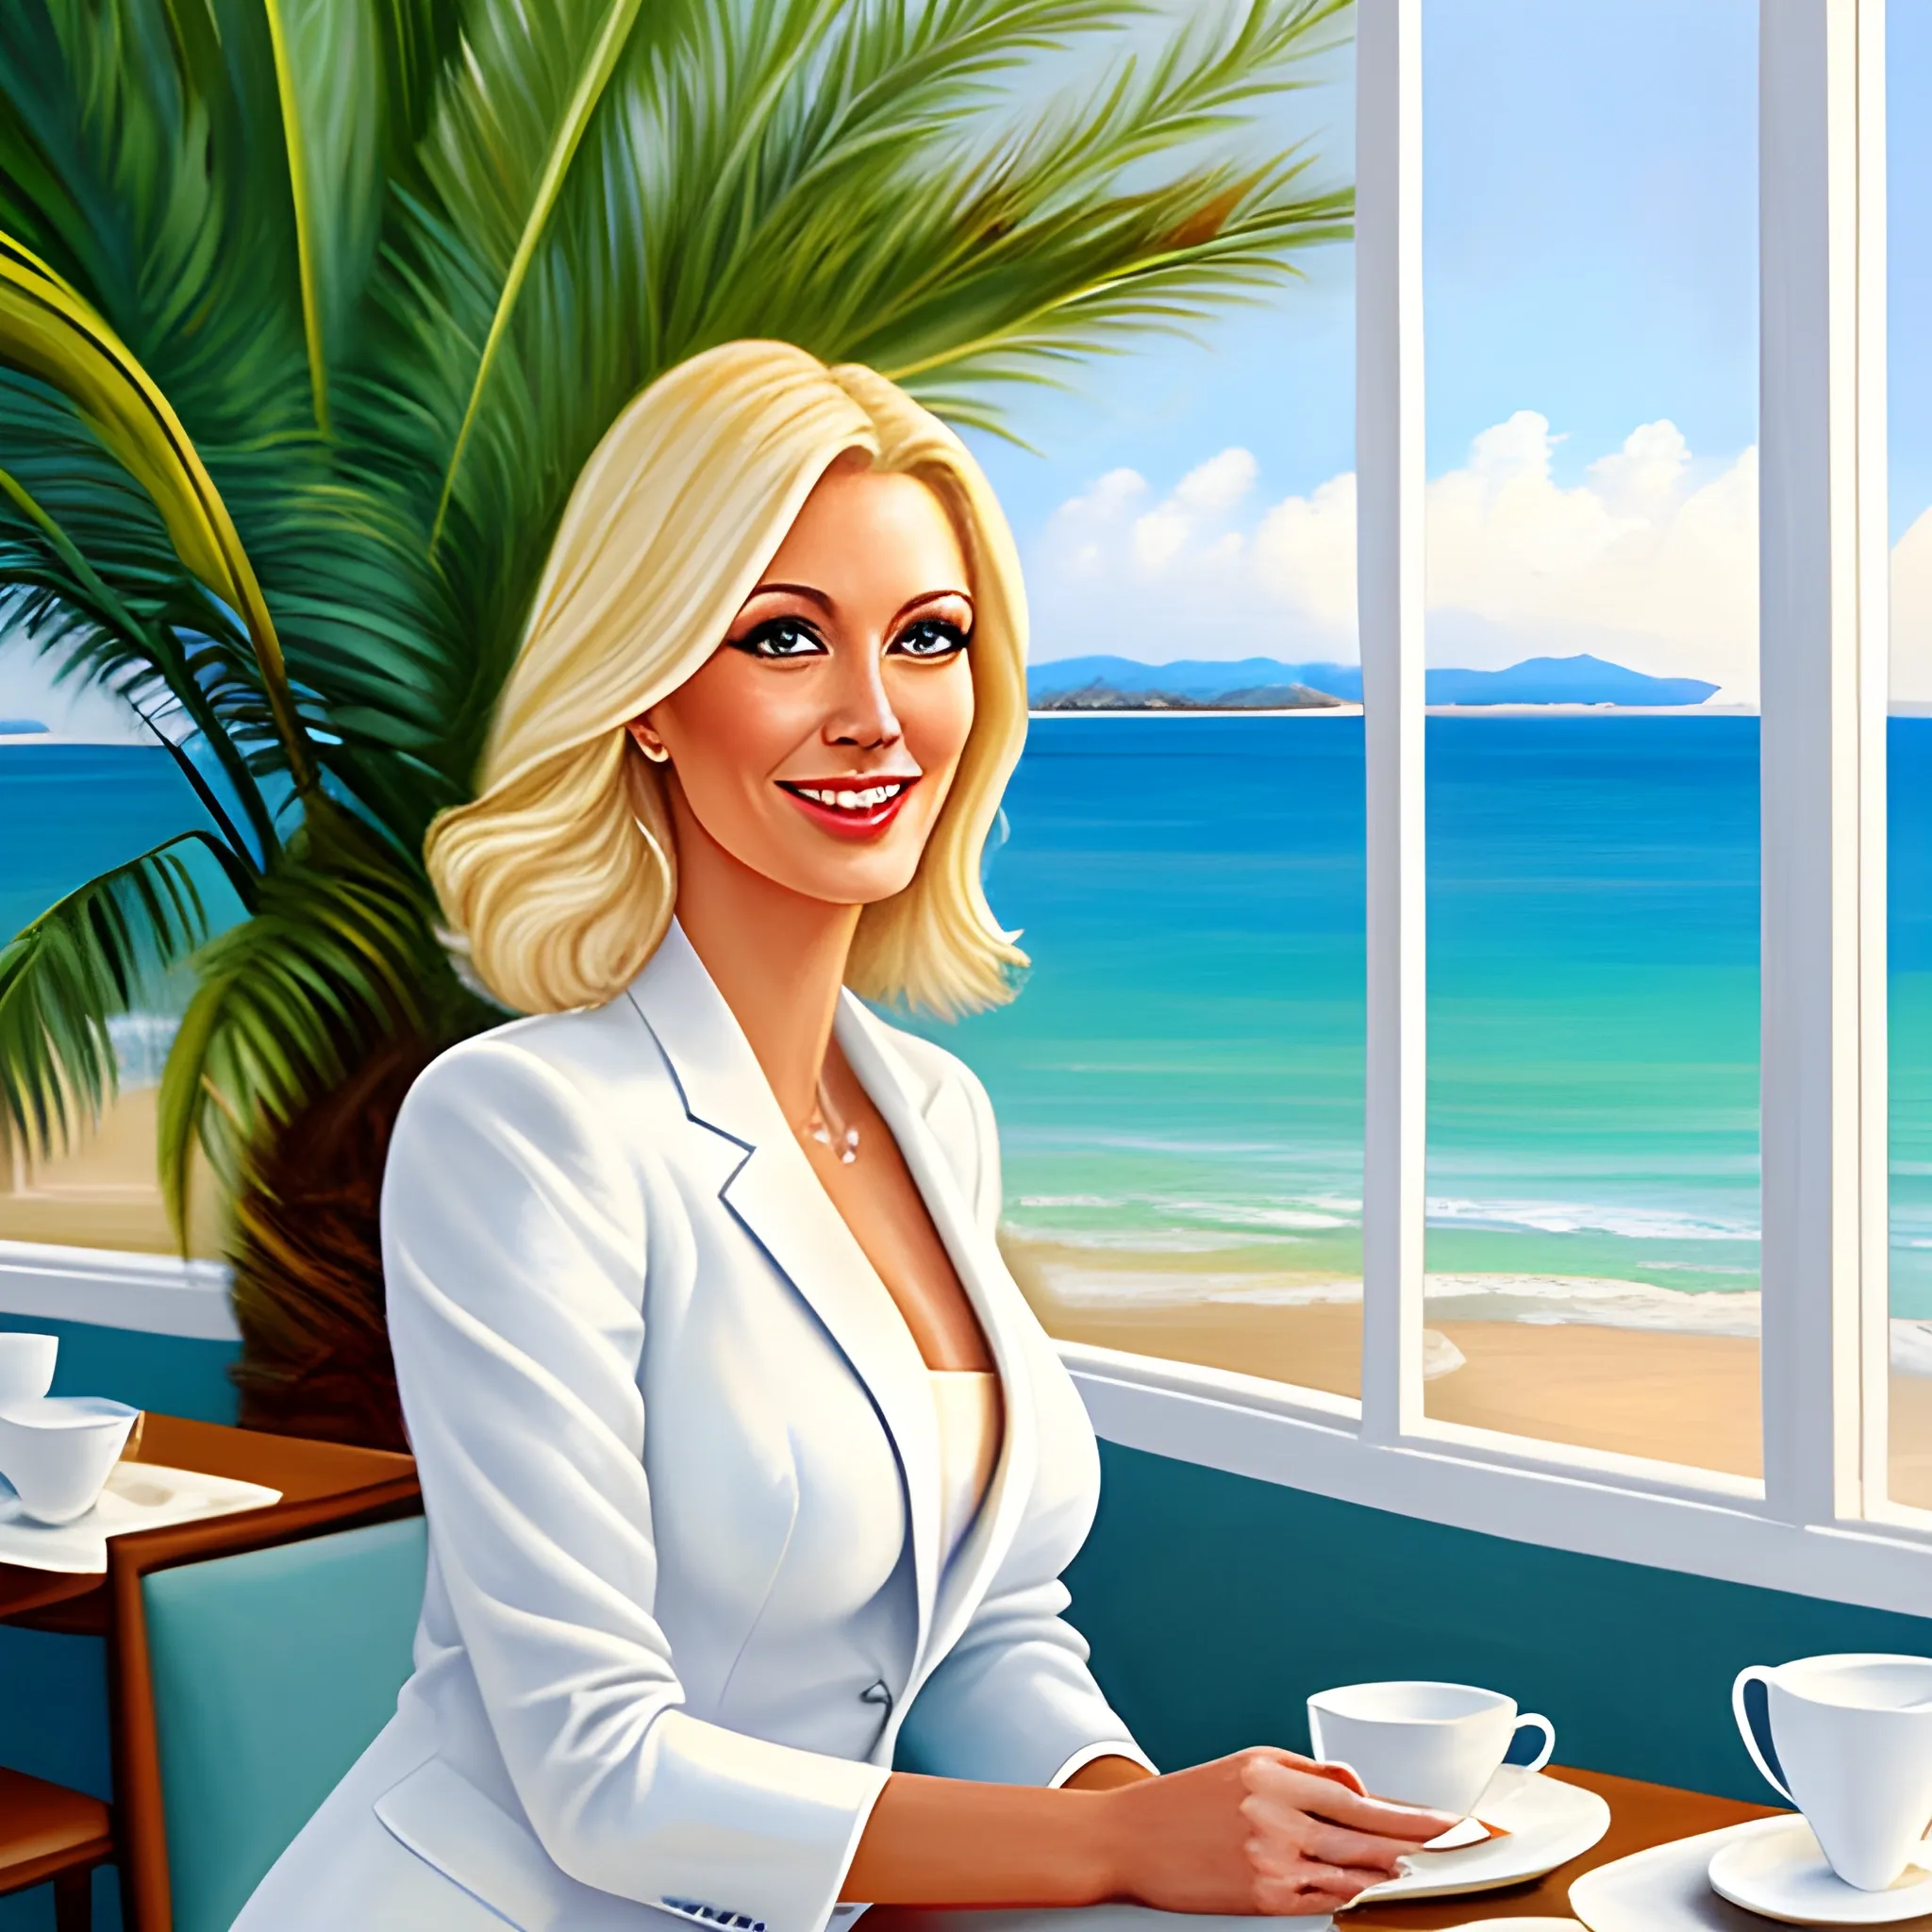 girl blonde 35 years old in a white suit smiles sitting in a prestigious cafe with large windows overlooking the sea and palm trees, Oil Painting, Oil Painting